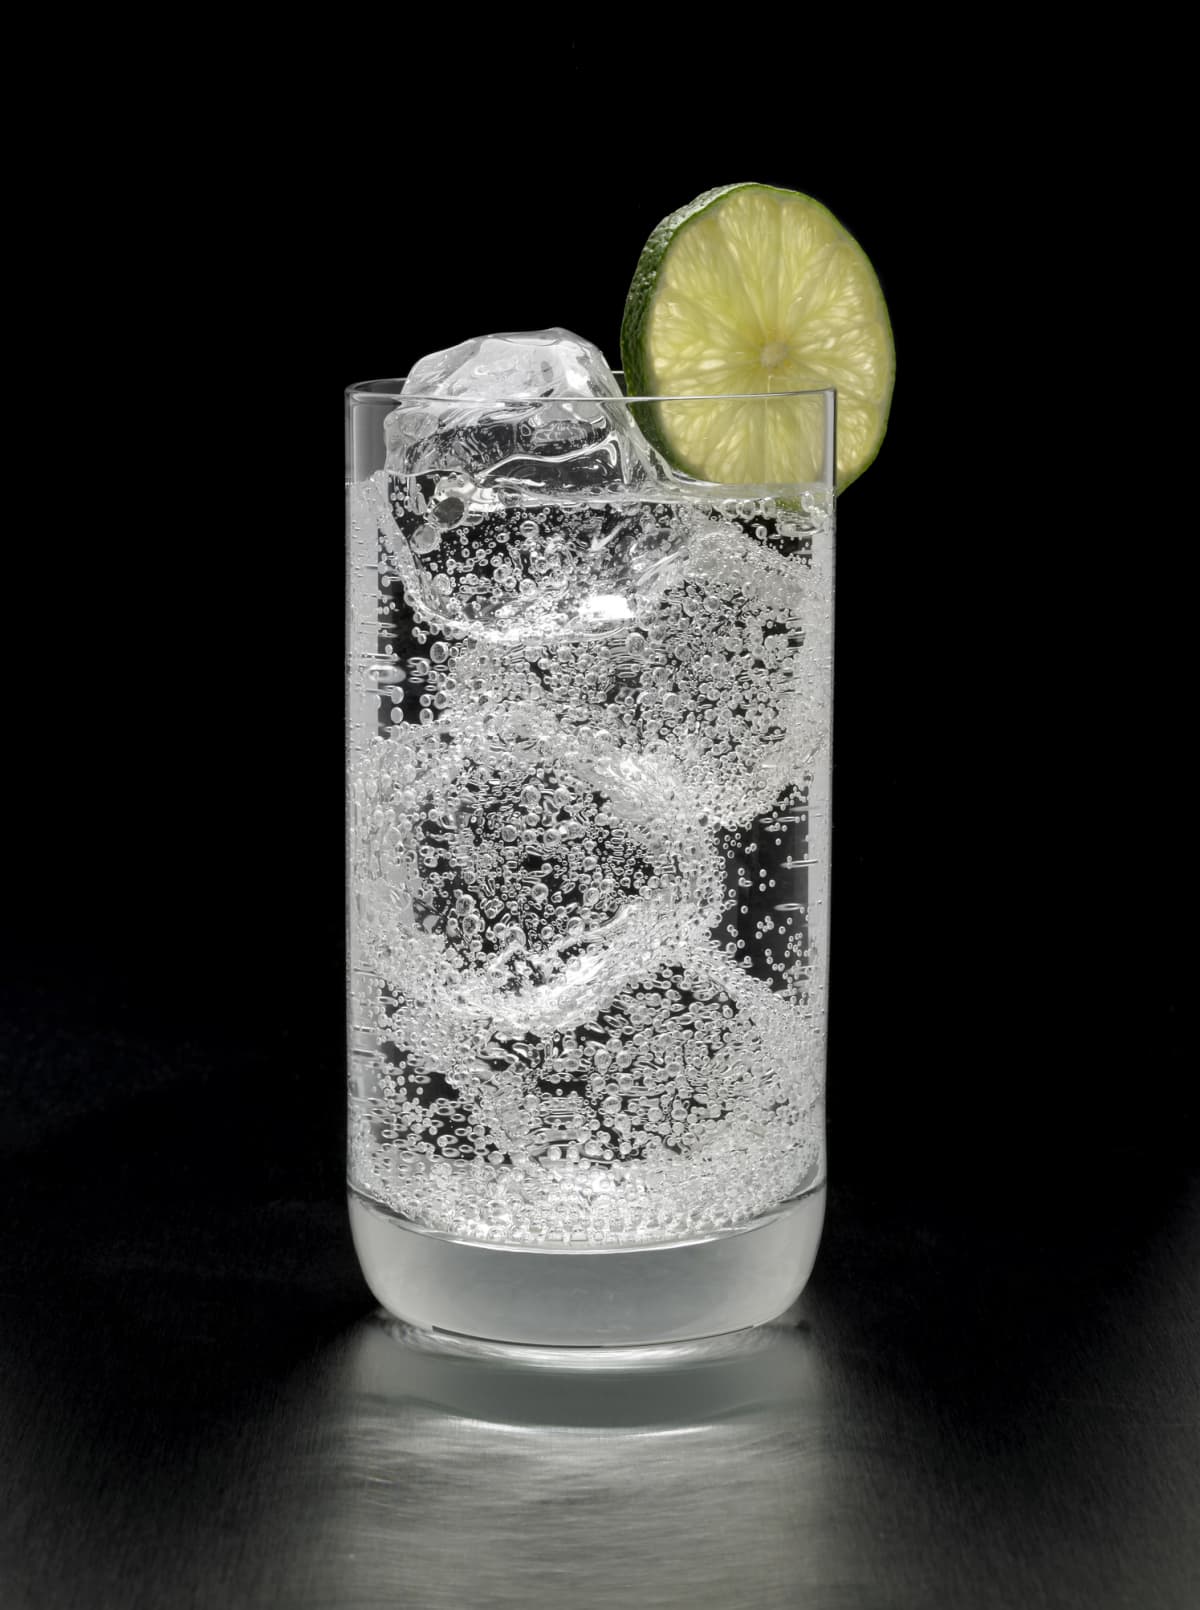 A refreshing gin, vodka or rum and tonic cocktail with a lime garnish, shot against a black background.